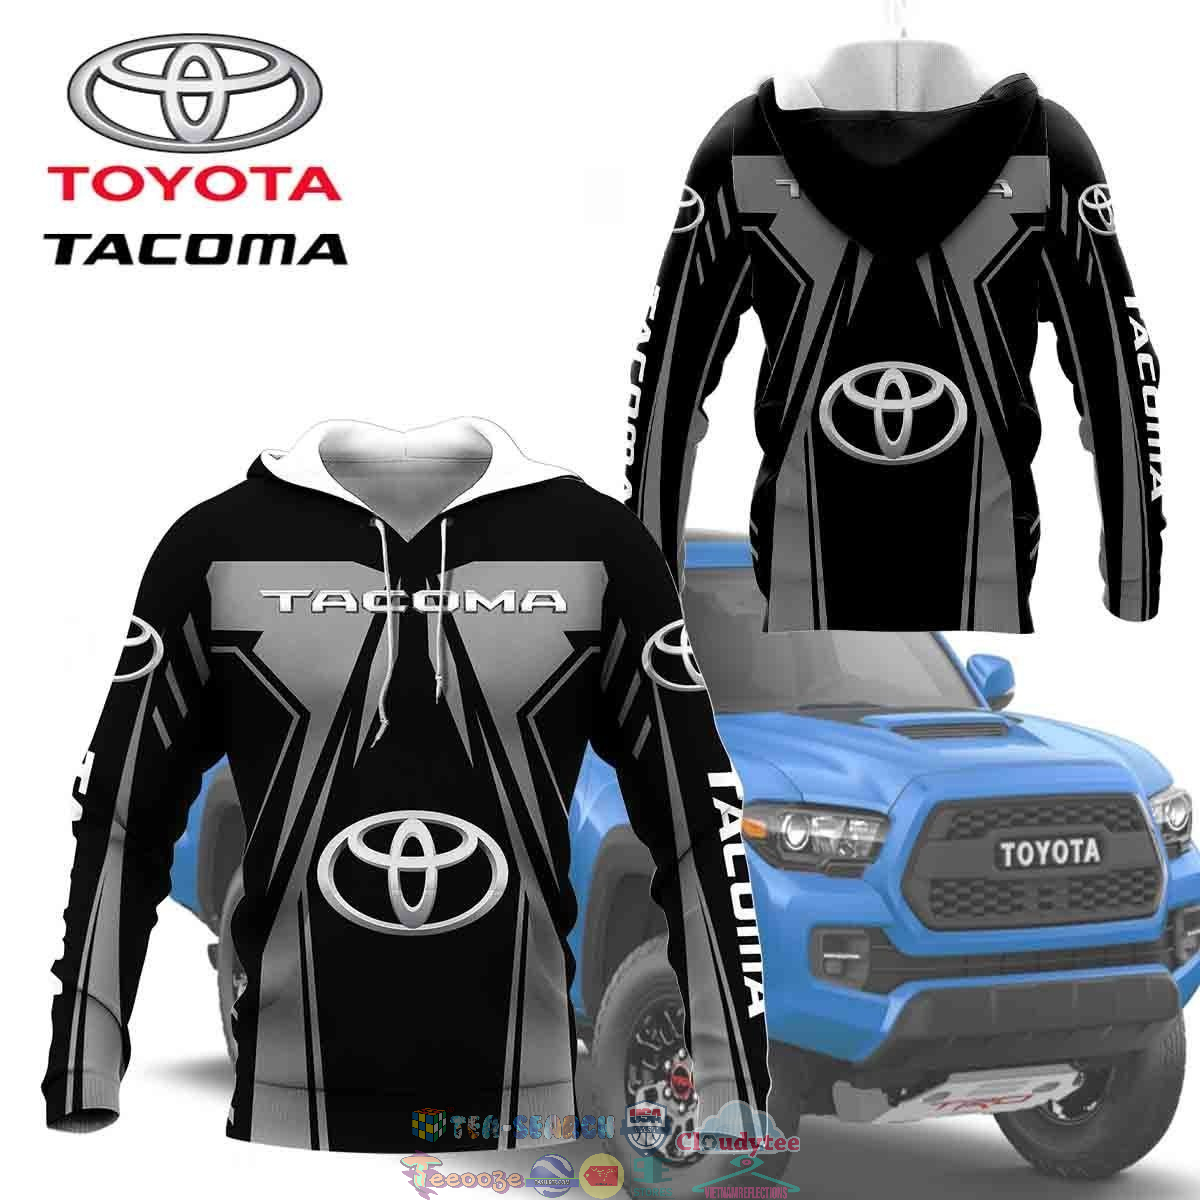 Toyota Tacoma ver 5 3D hoodie and t-shirt